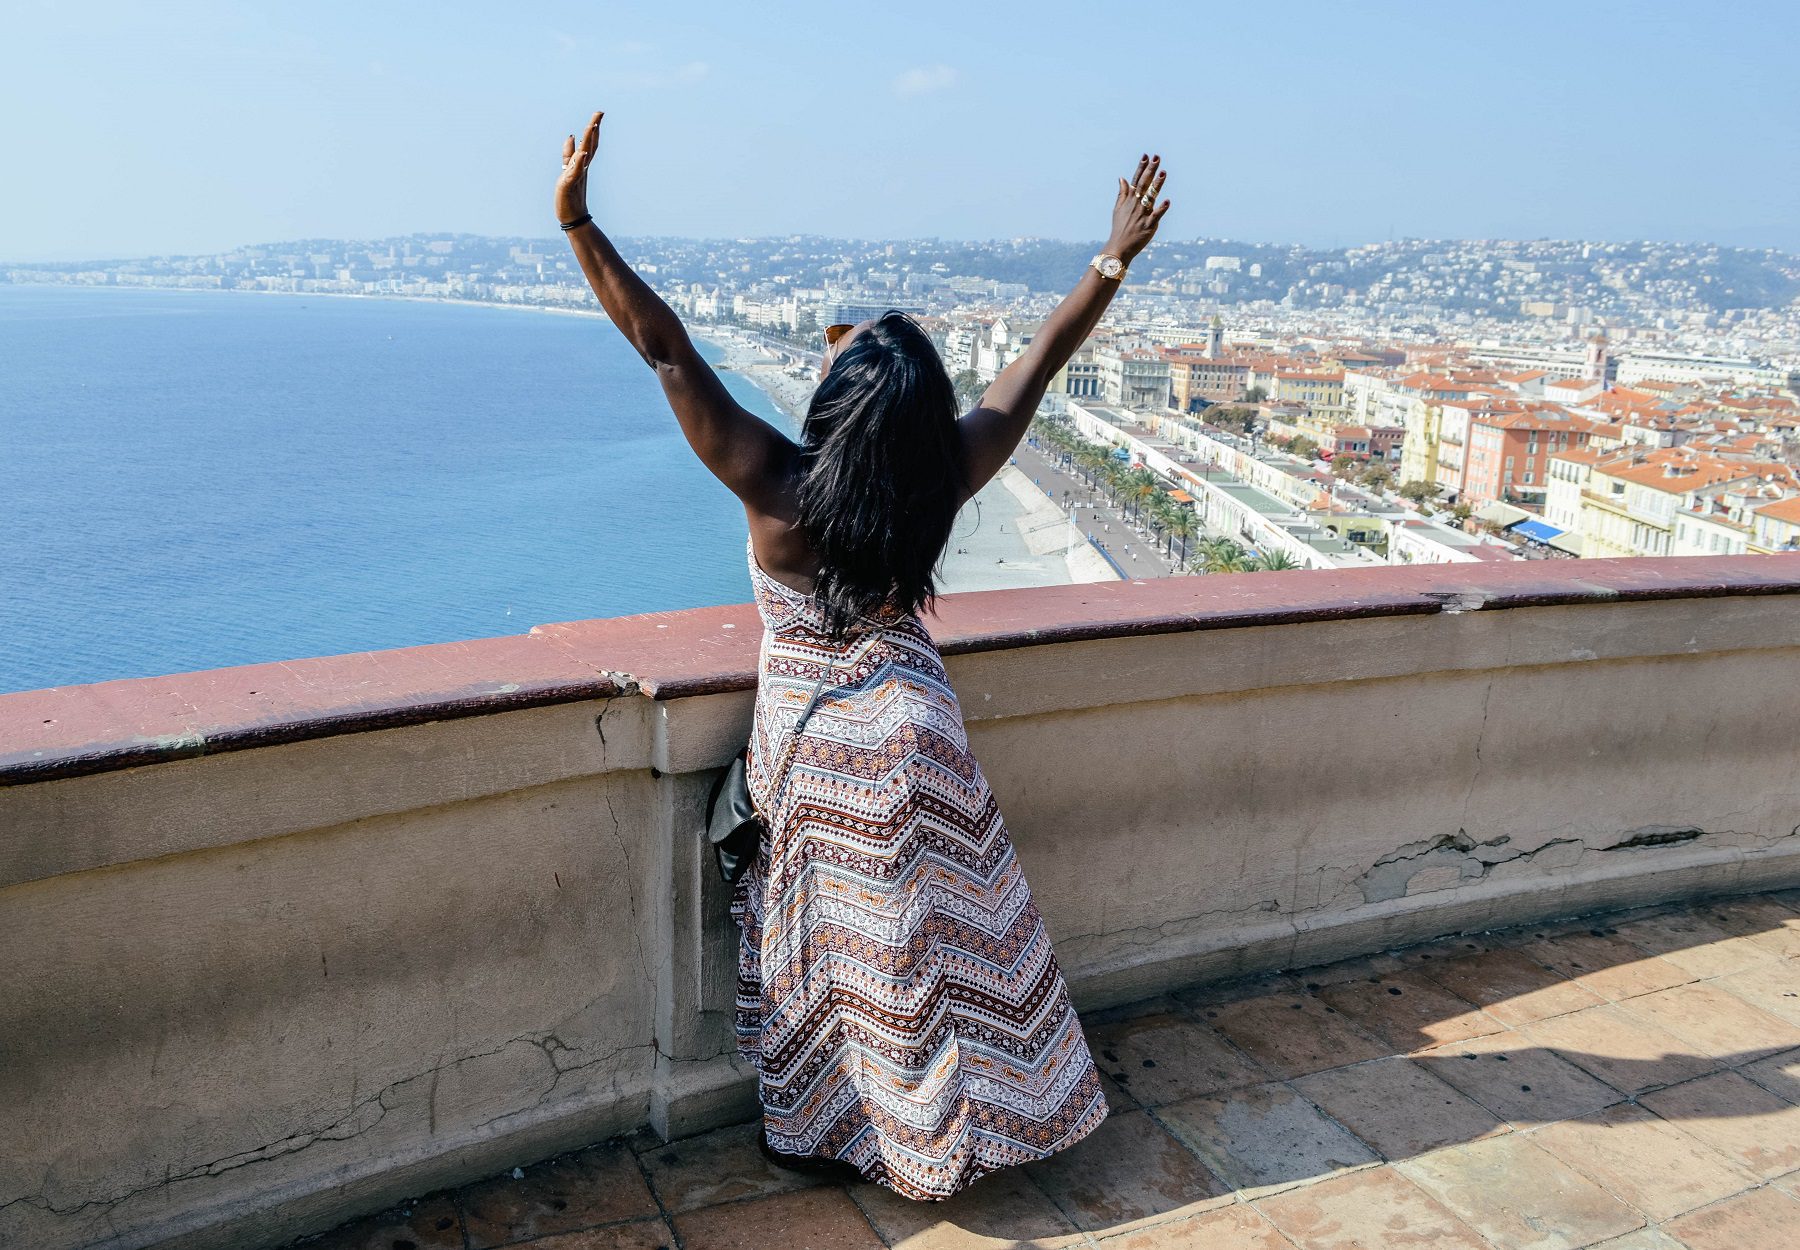 Overlooking the Promenade des Anglais in Nice